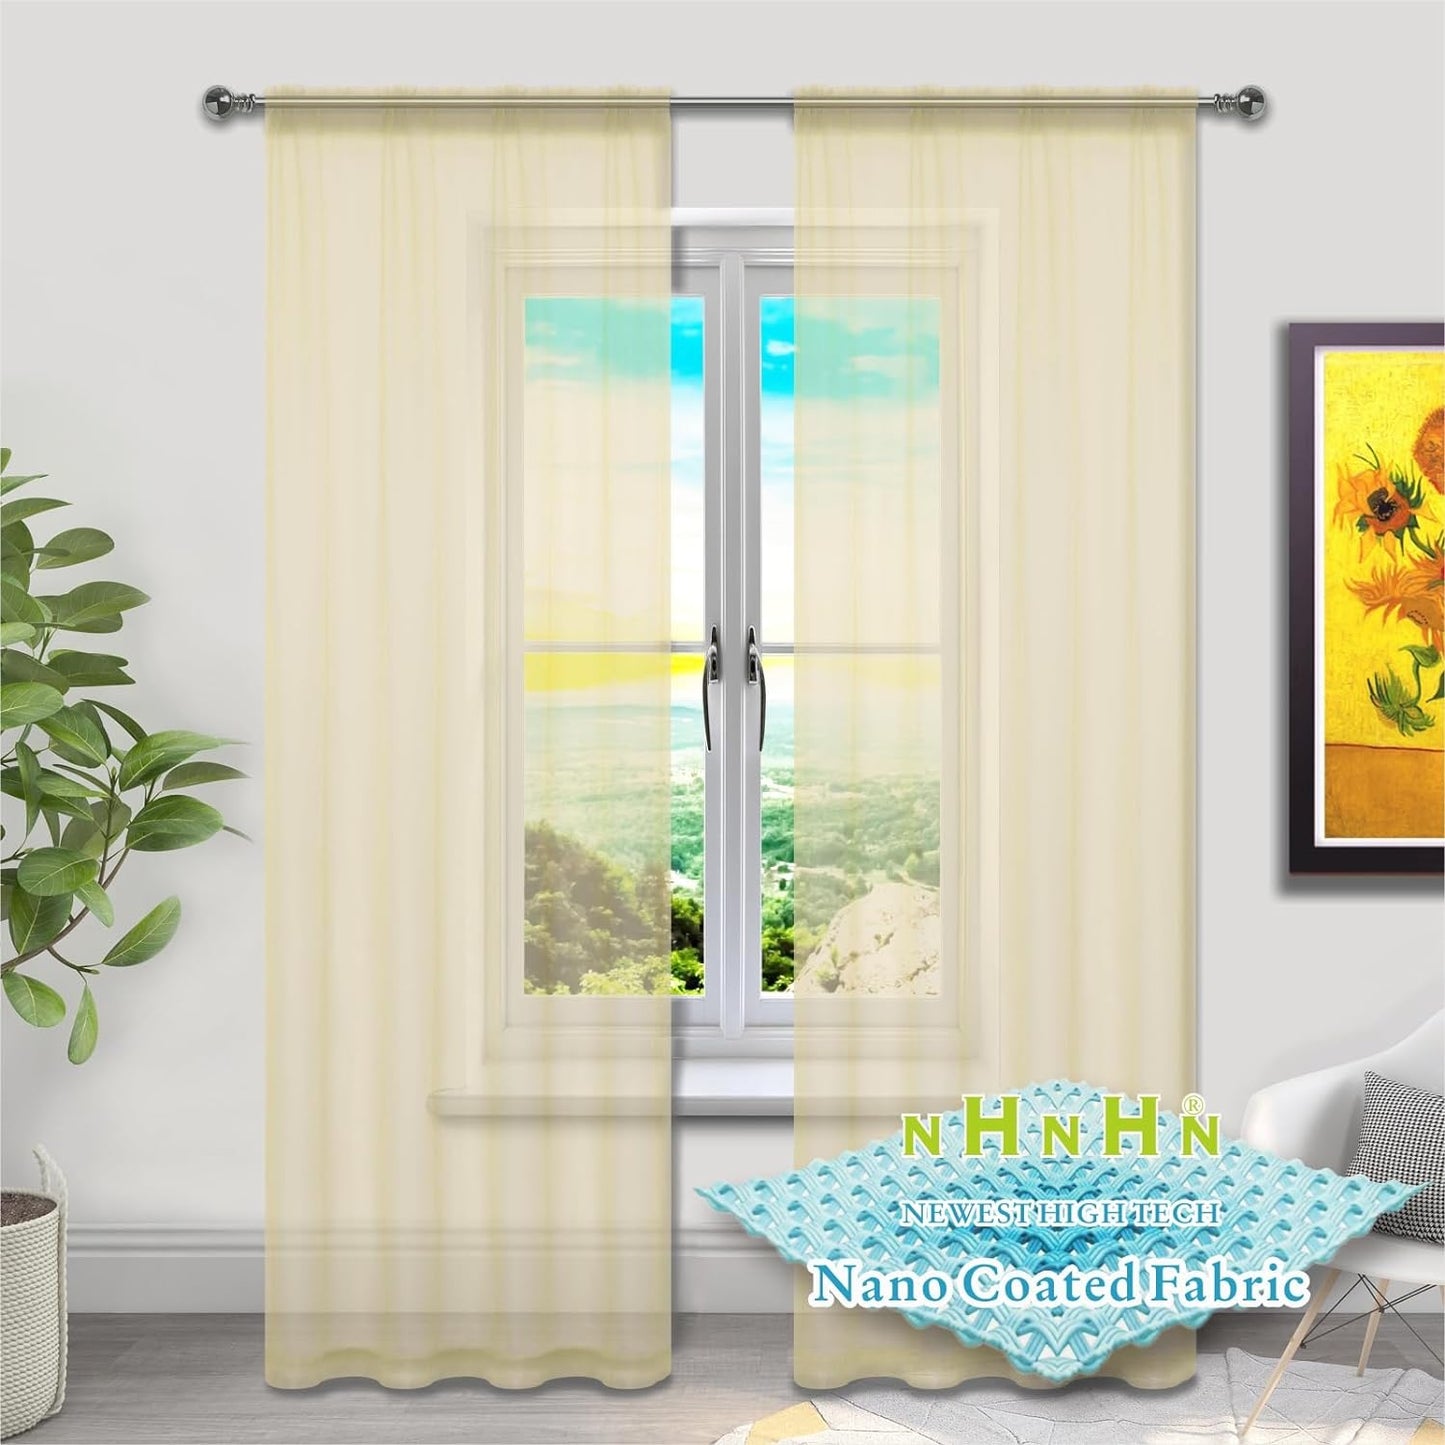 NHNHN Nano Material Coated White Sheer Curtains 84 Inches Long, Rod Pocket Window Drapes Voile Sheer Curtain 2 Panels for Living Room Bedroom Kitchen (White, W52 X L84)  NHNHN Cream 52W X 72L | 2 Panels 